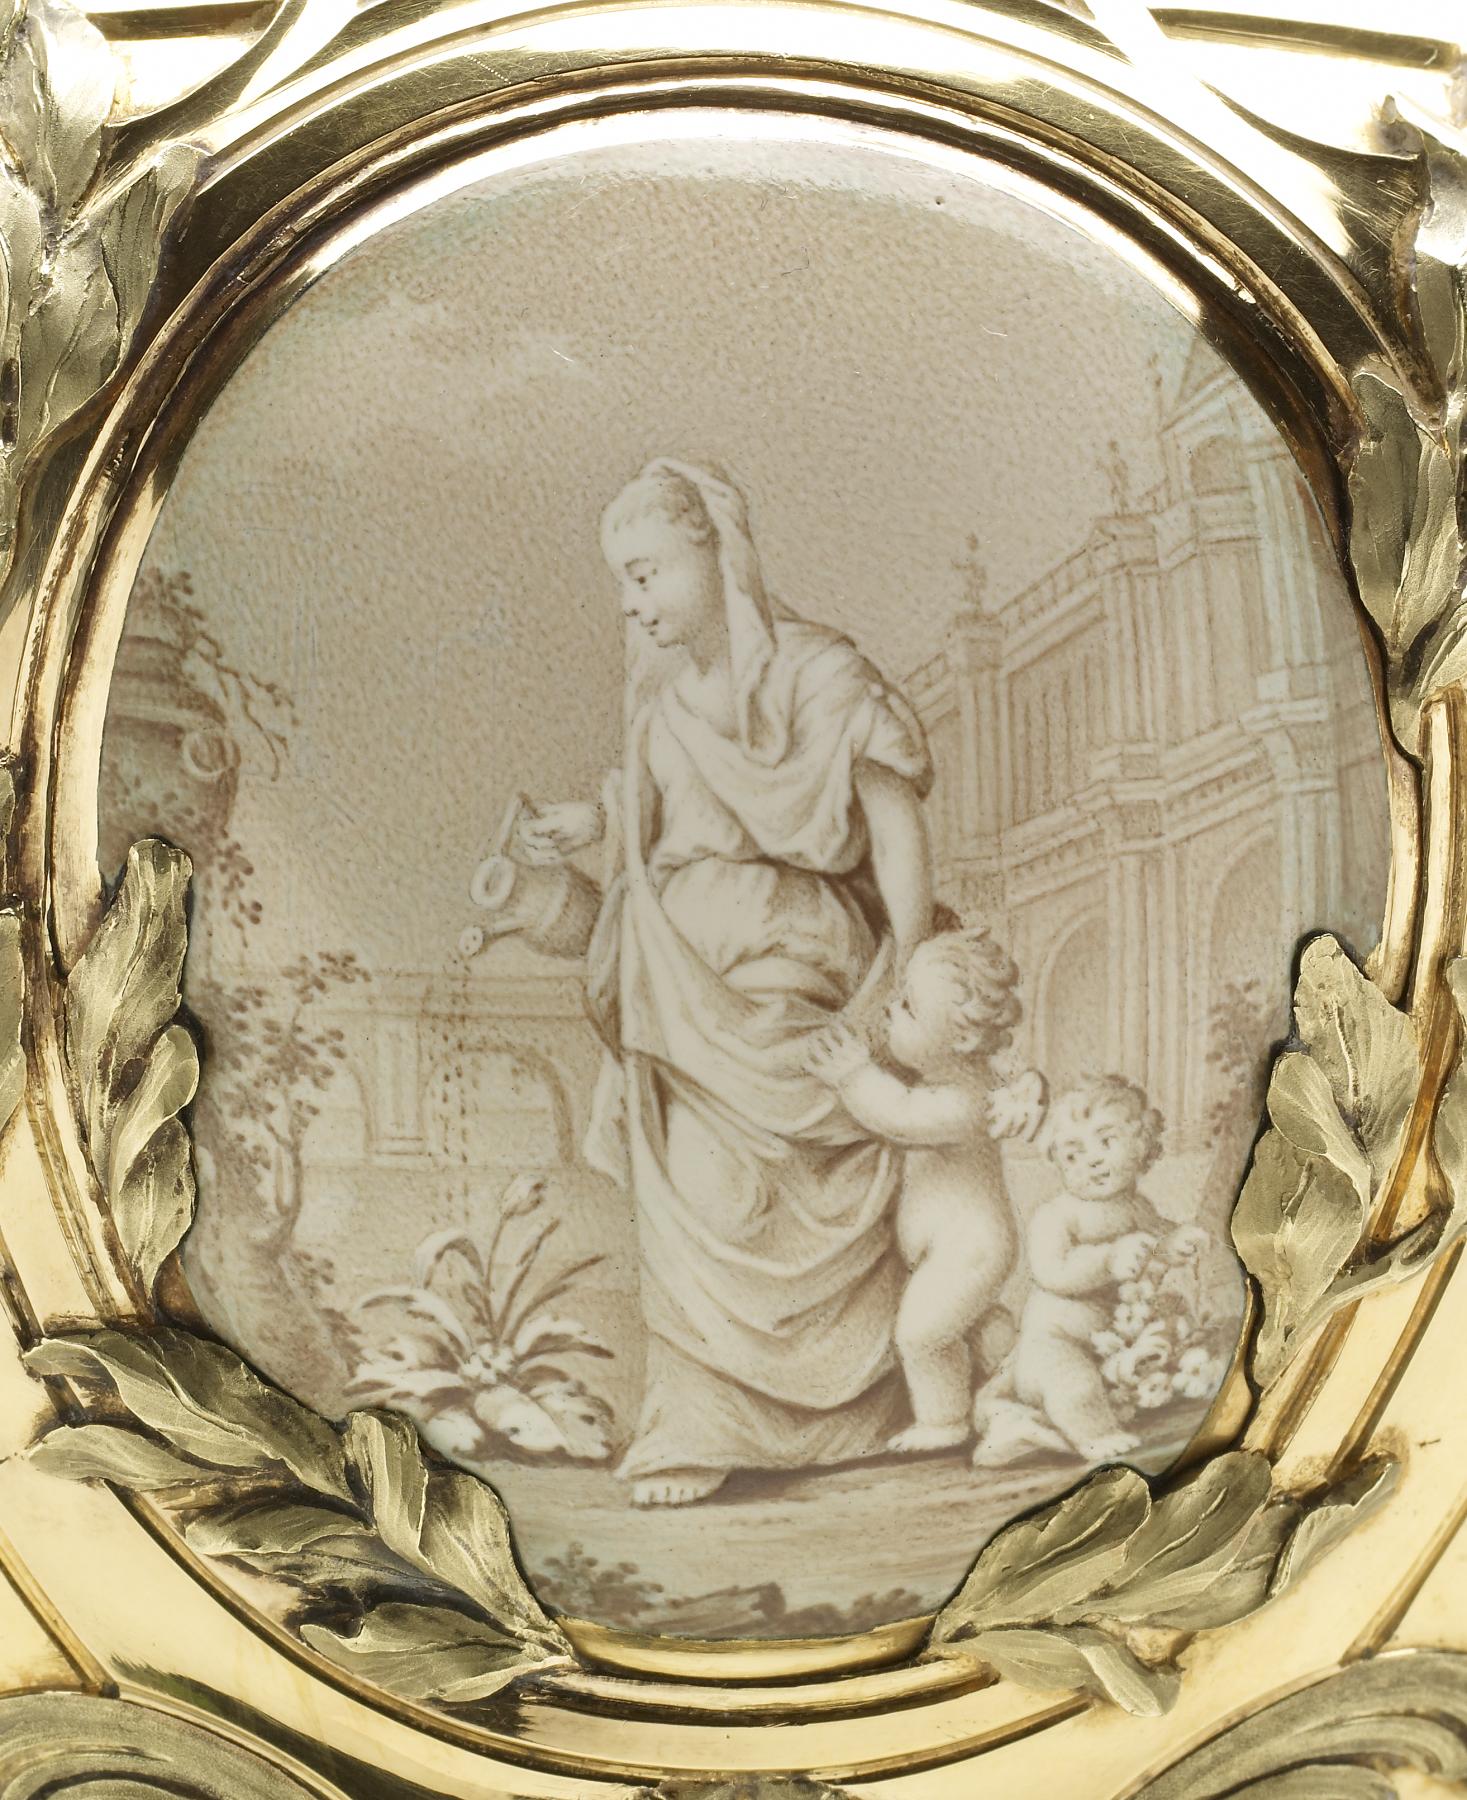 Image for Potpourri Vase with Classical Figures